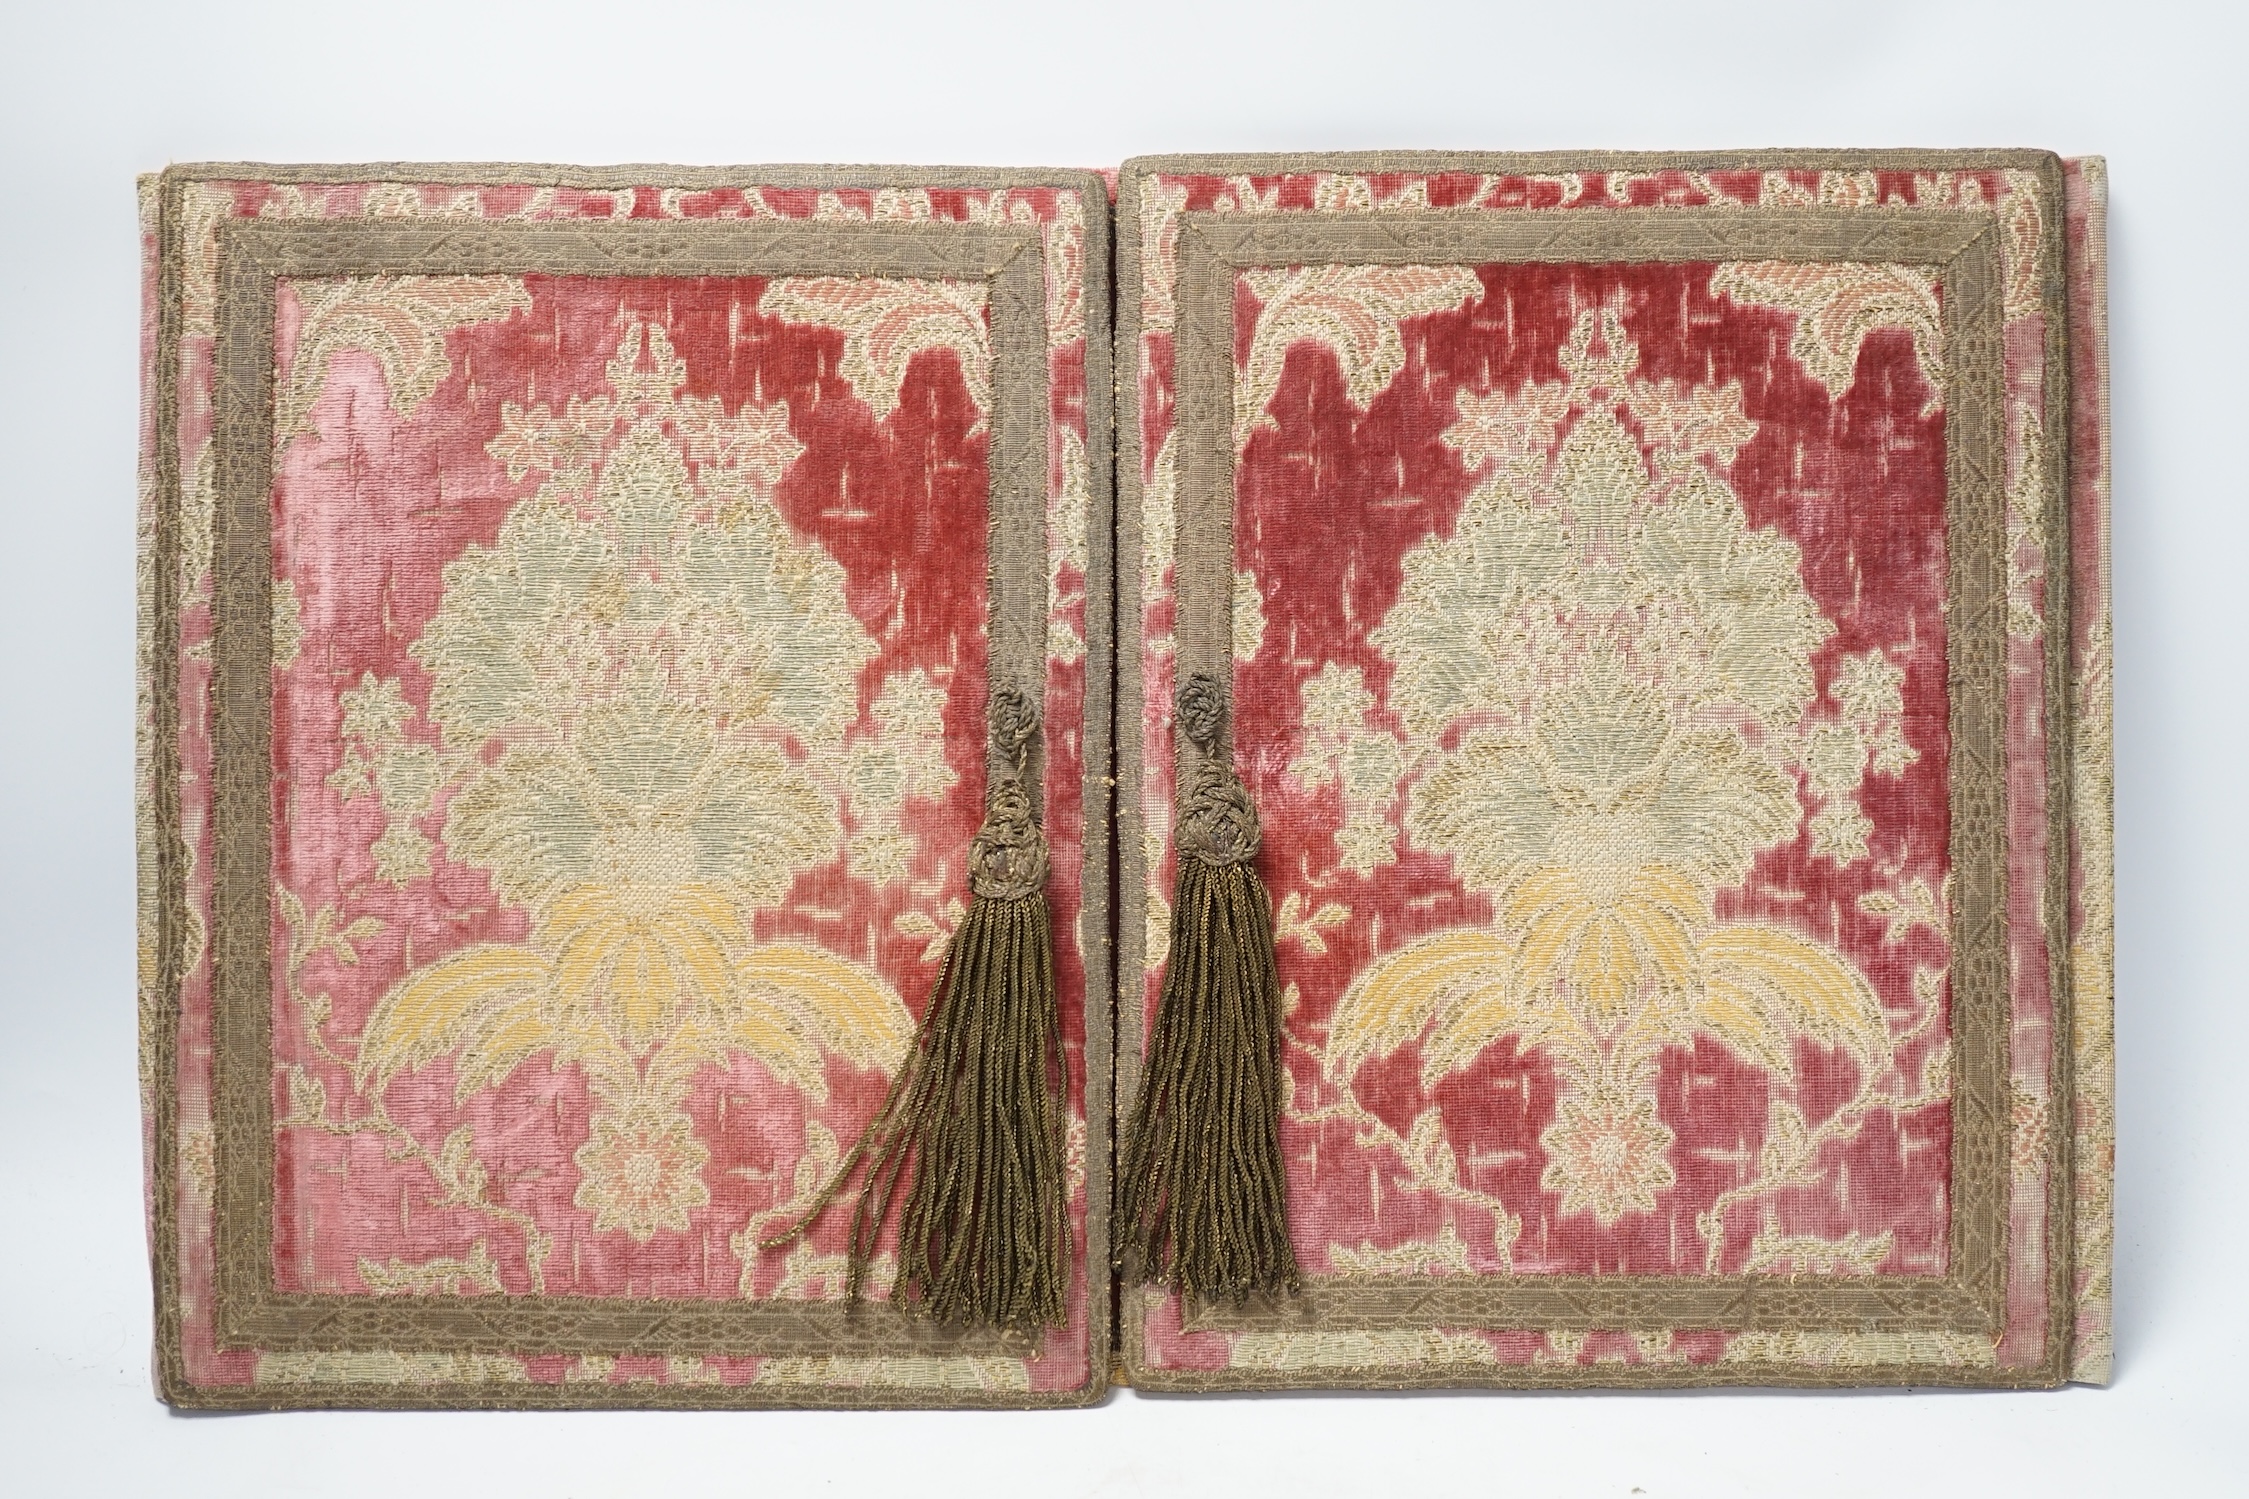 An embroidered writing pad in damask and velvet, in an 18th century style, 32 x 51cm. Condition - poor to fair, generally faded